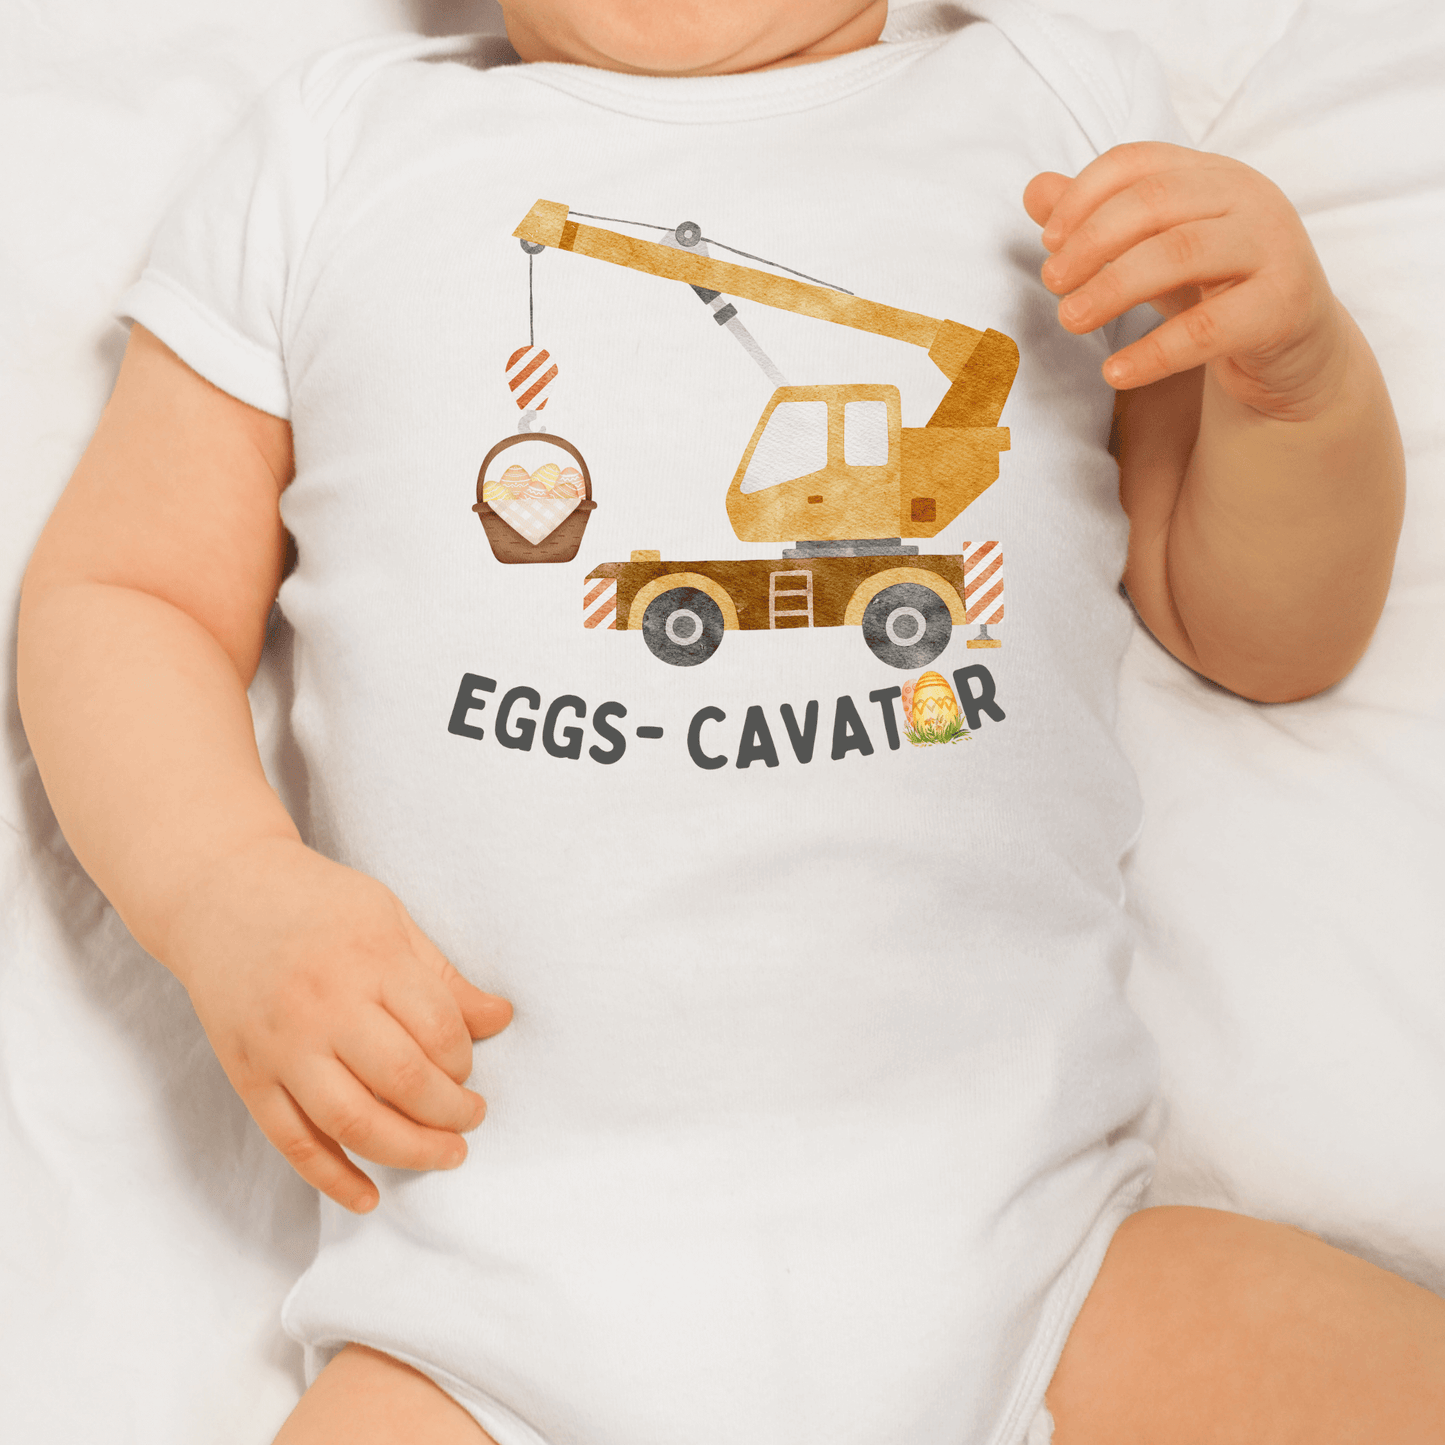 Easter baby outfit, baby toddler clothes, easter Sunday clothing, funny easter outfit, hipster baby easter clothes, spring outfit